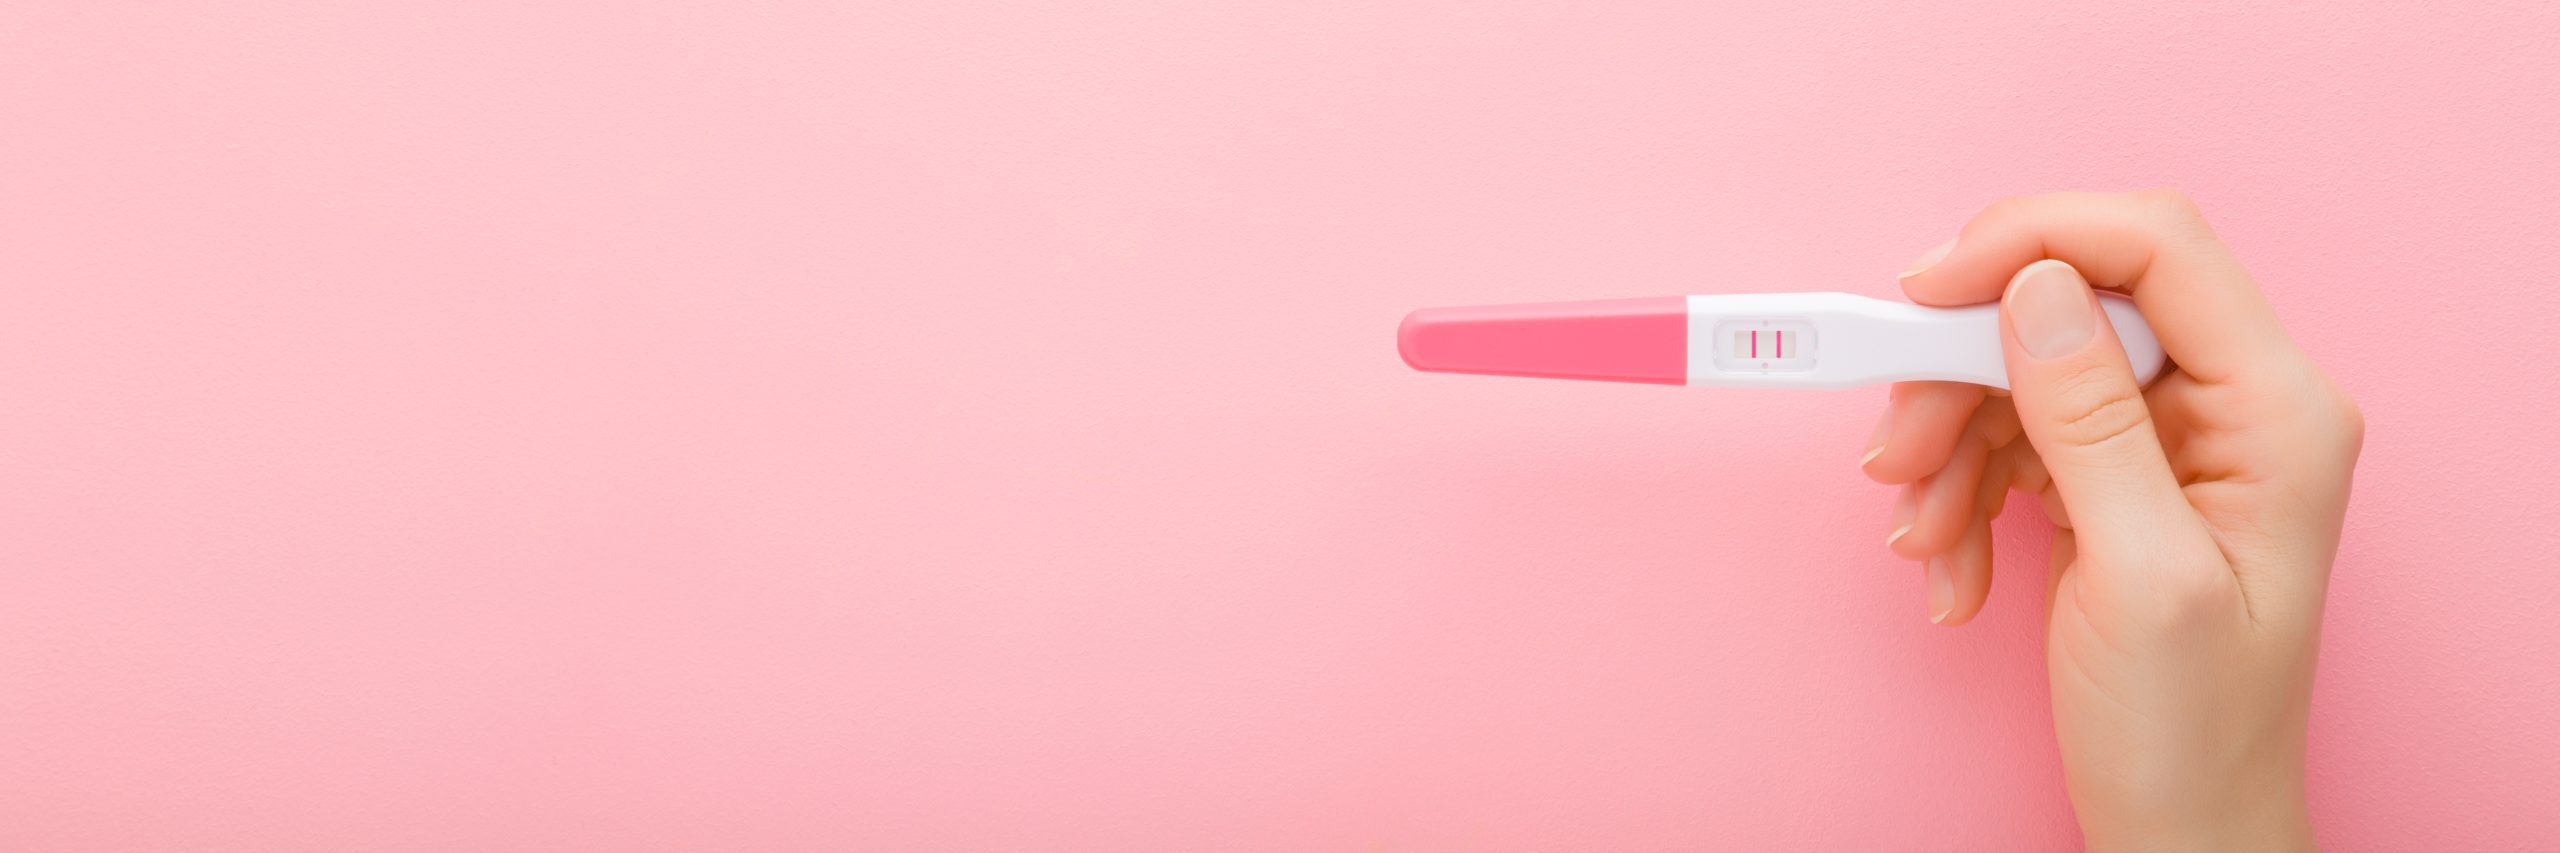 Pregnancy Tests: How They Work & What to Expect